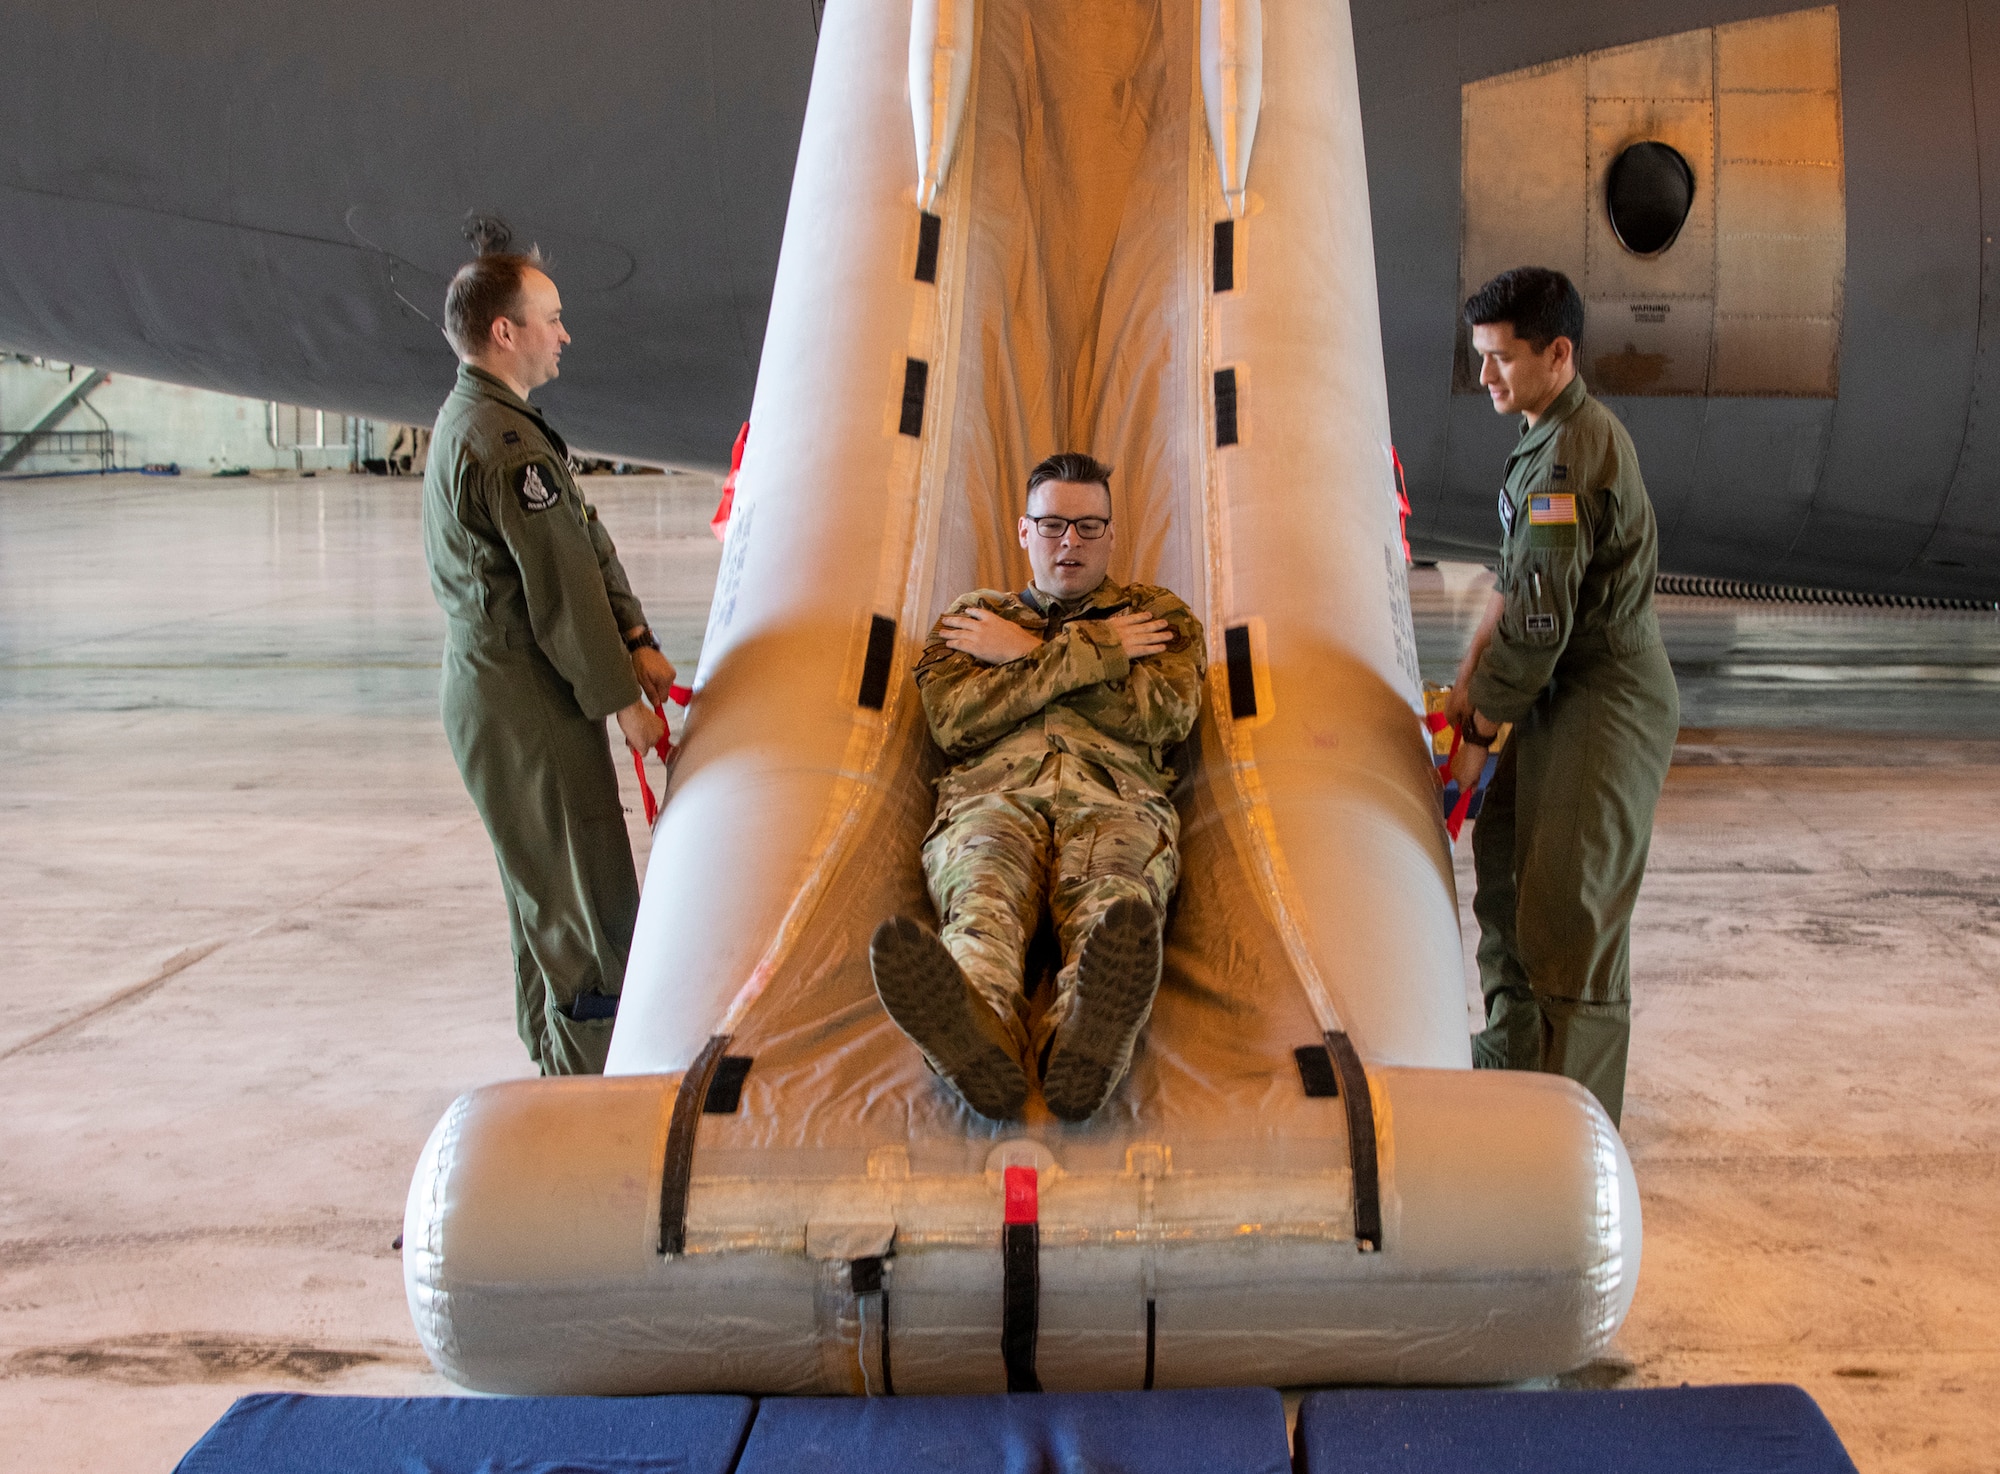 U.S. Air Force Capt. Drew Pagenkopf, left,  tactics flight commander, and Capt. Jose Hinojosa, right, C-5 evaluator aircraft commander, both with the 22nd Airlift Squadron watch as Staff Sgt. Kevin Robinson, 22 AS loadmaster evaluator, uses a C-5M Super Galaxy emergency escape slide Sept. 6, 2019, at Travis Air Force Base, California. Robinson wore a Go Pro camera to record footage of the process to be used to develop a virtual reality training program on aircraft procedures. (U.S. Air Force photo by Heide Couch)